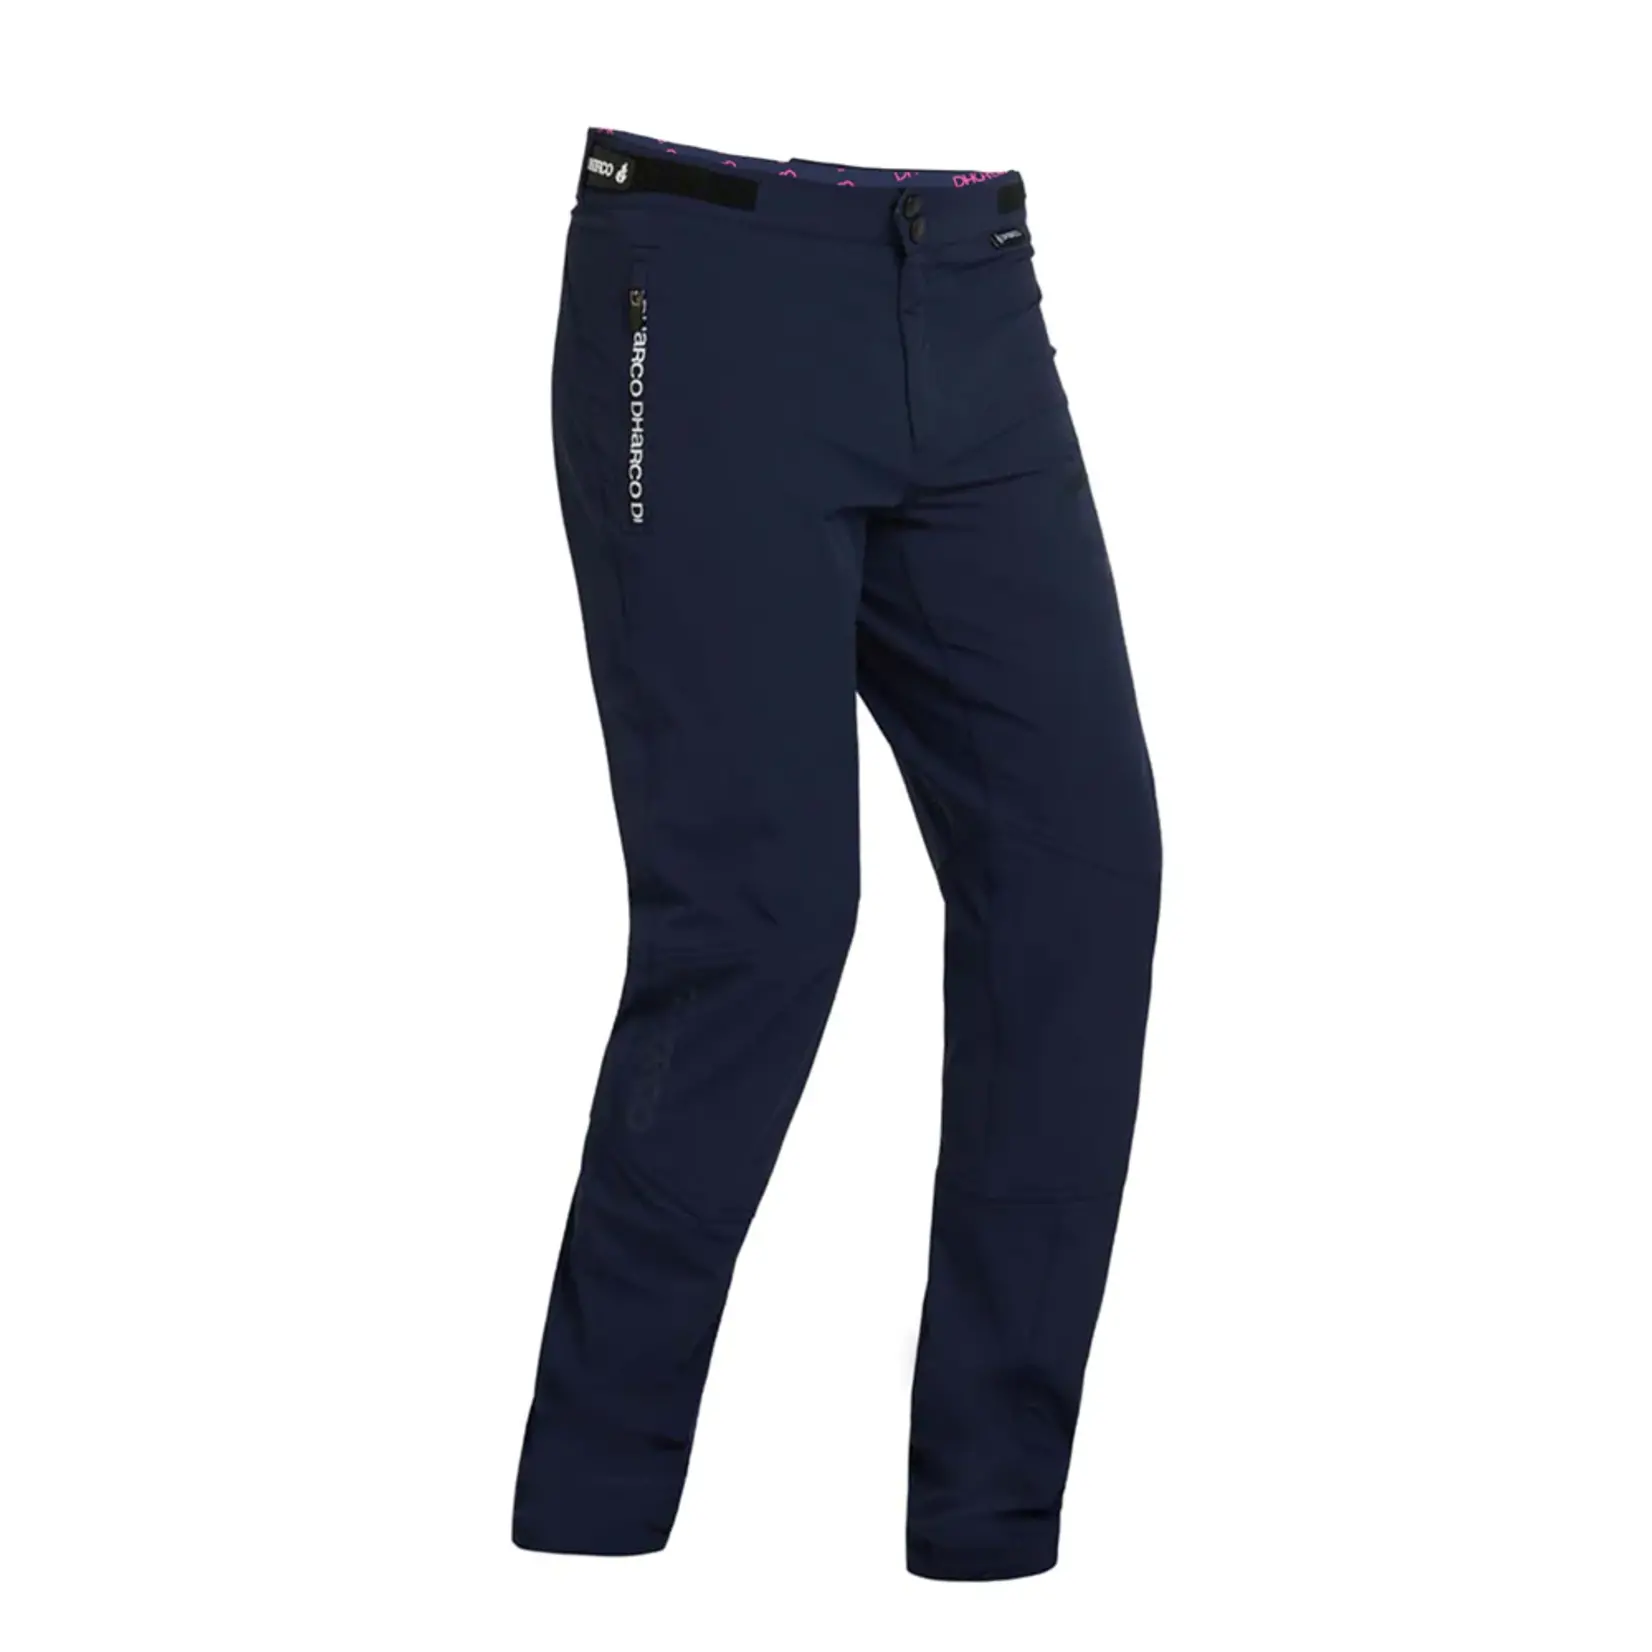 DHaRCO DHaRCO Gravity Pants Youth